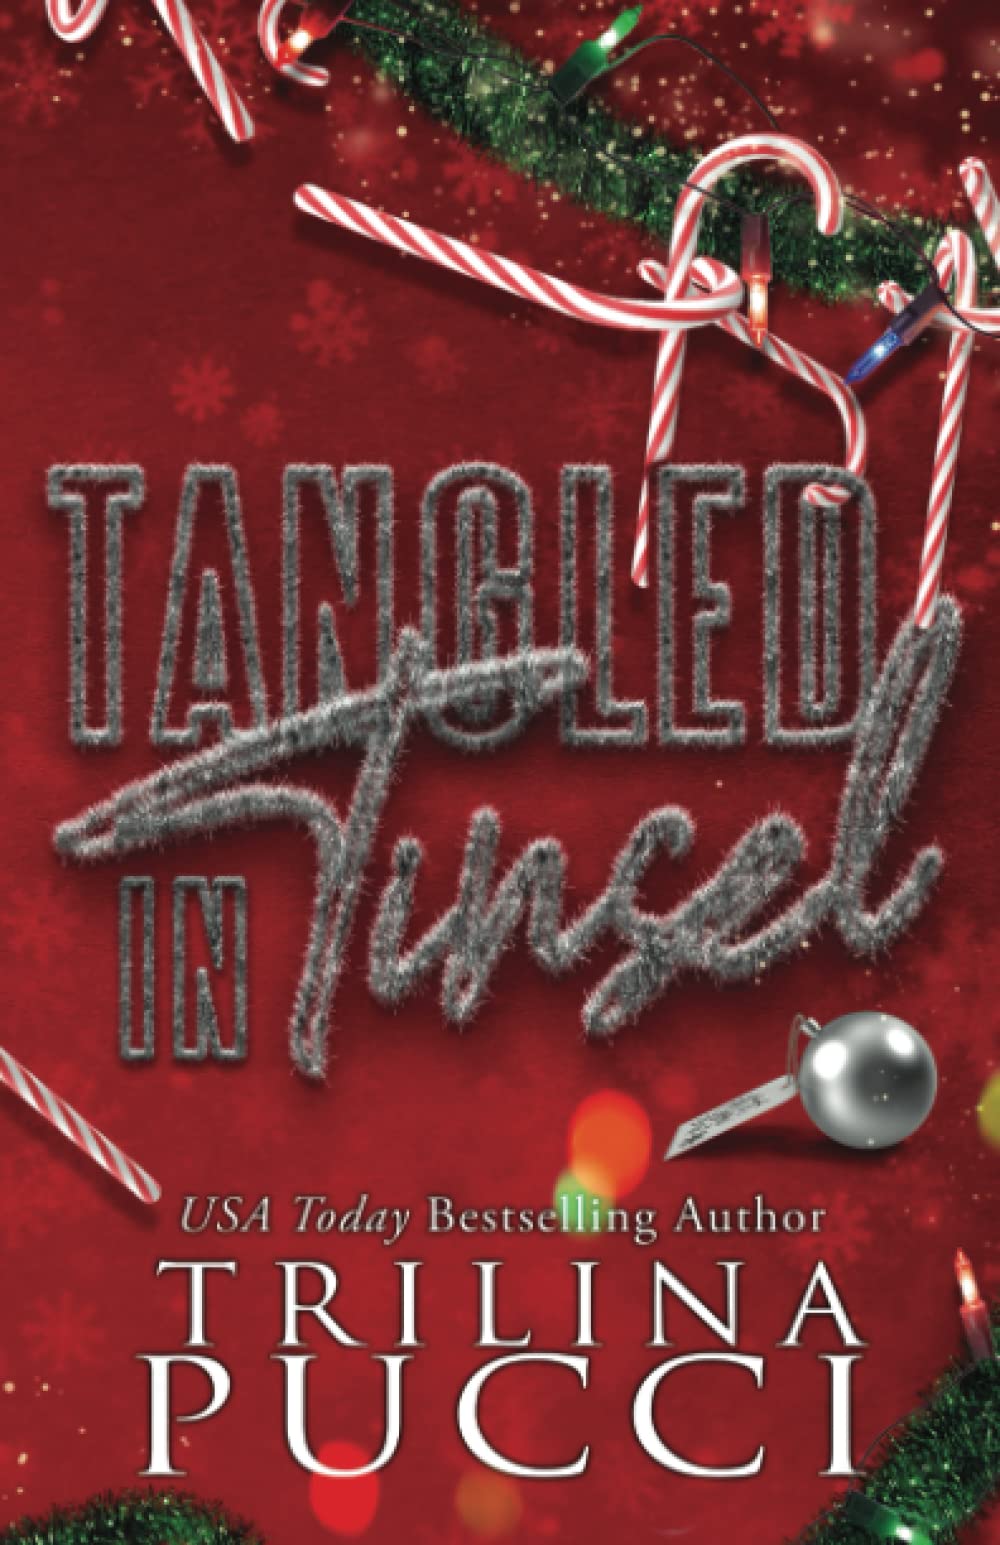 [EPUB] The More the Merrier Tangled in Tinsel by Trilina Pucci